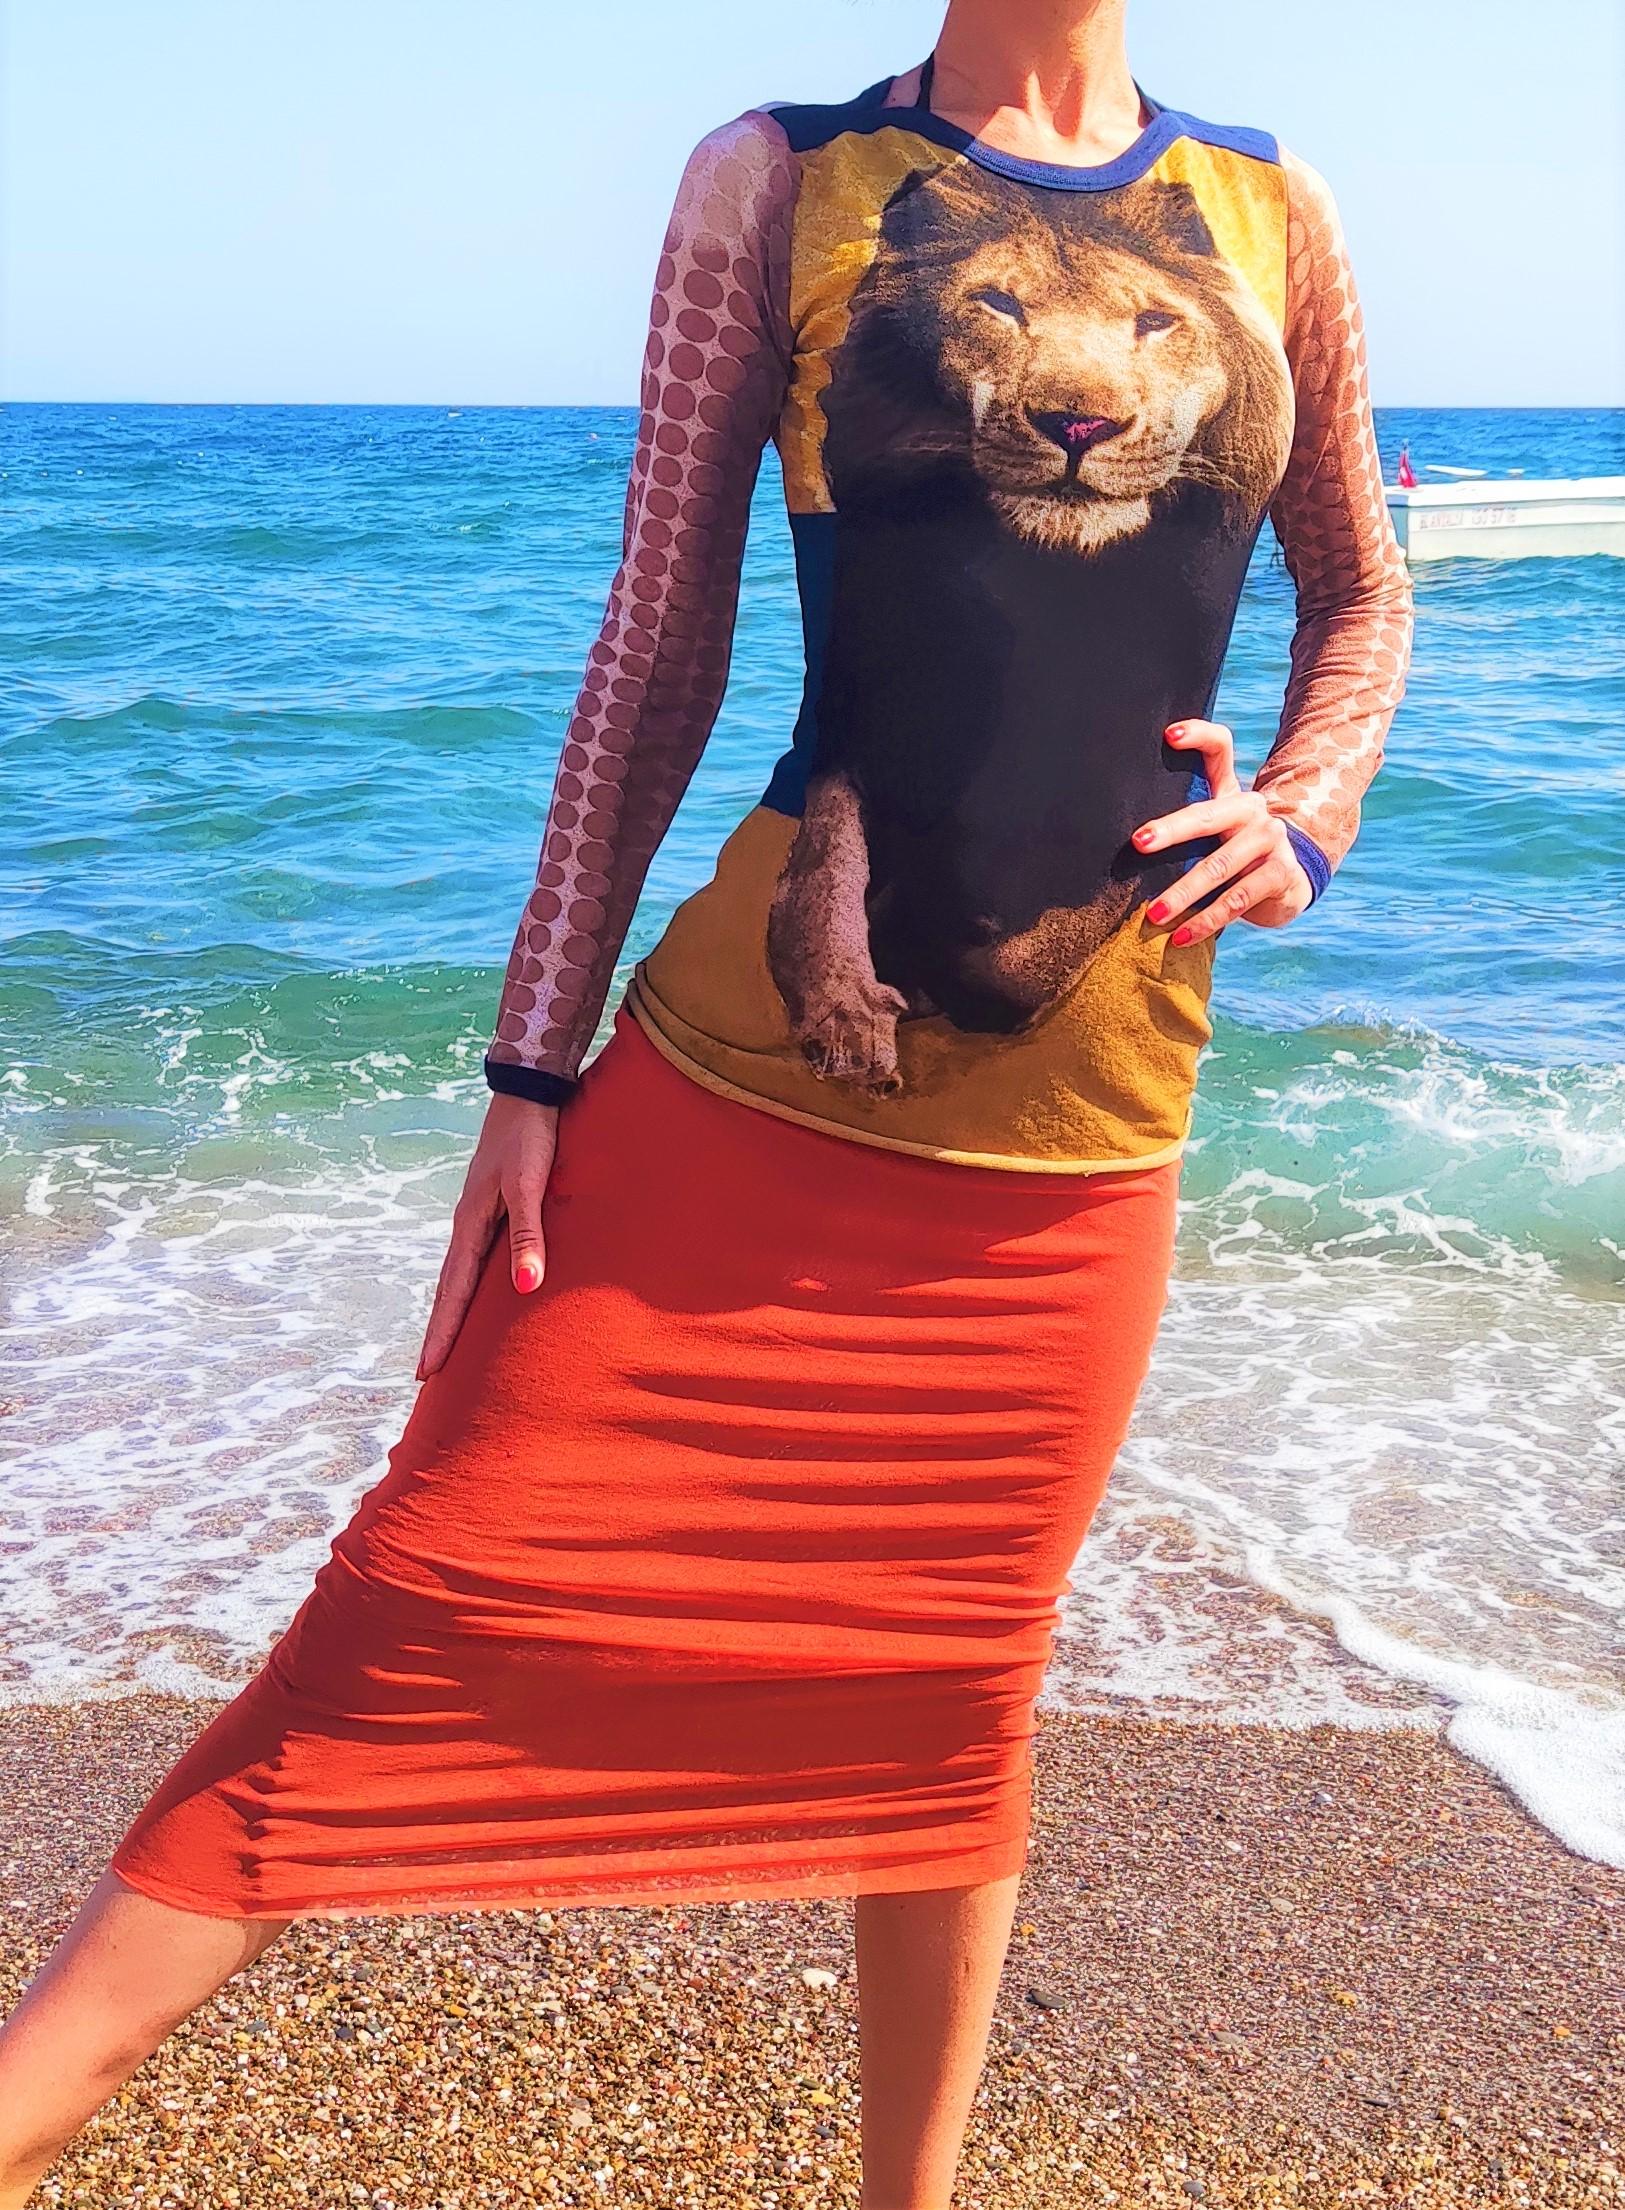 Iconic lion cyberbaba mesh dress by Jean Paul Gaultier!
From the Spring Summer 1996 Collection!
Skirt + top!

For sale is an iconic and rare Jean Paul Gaultier Lion Cyberdot top from his spring summer 1996 collection that has been inspired by the